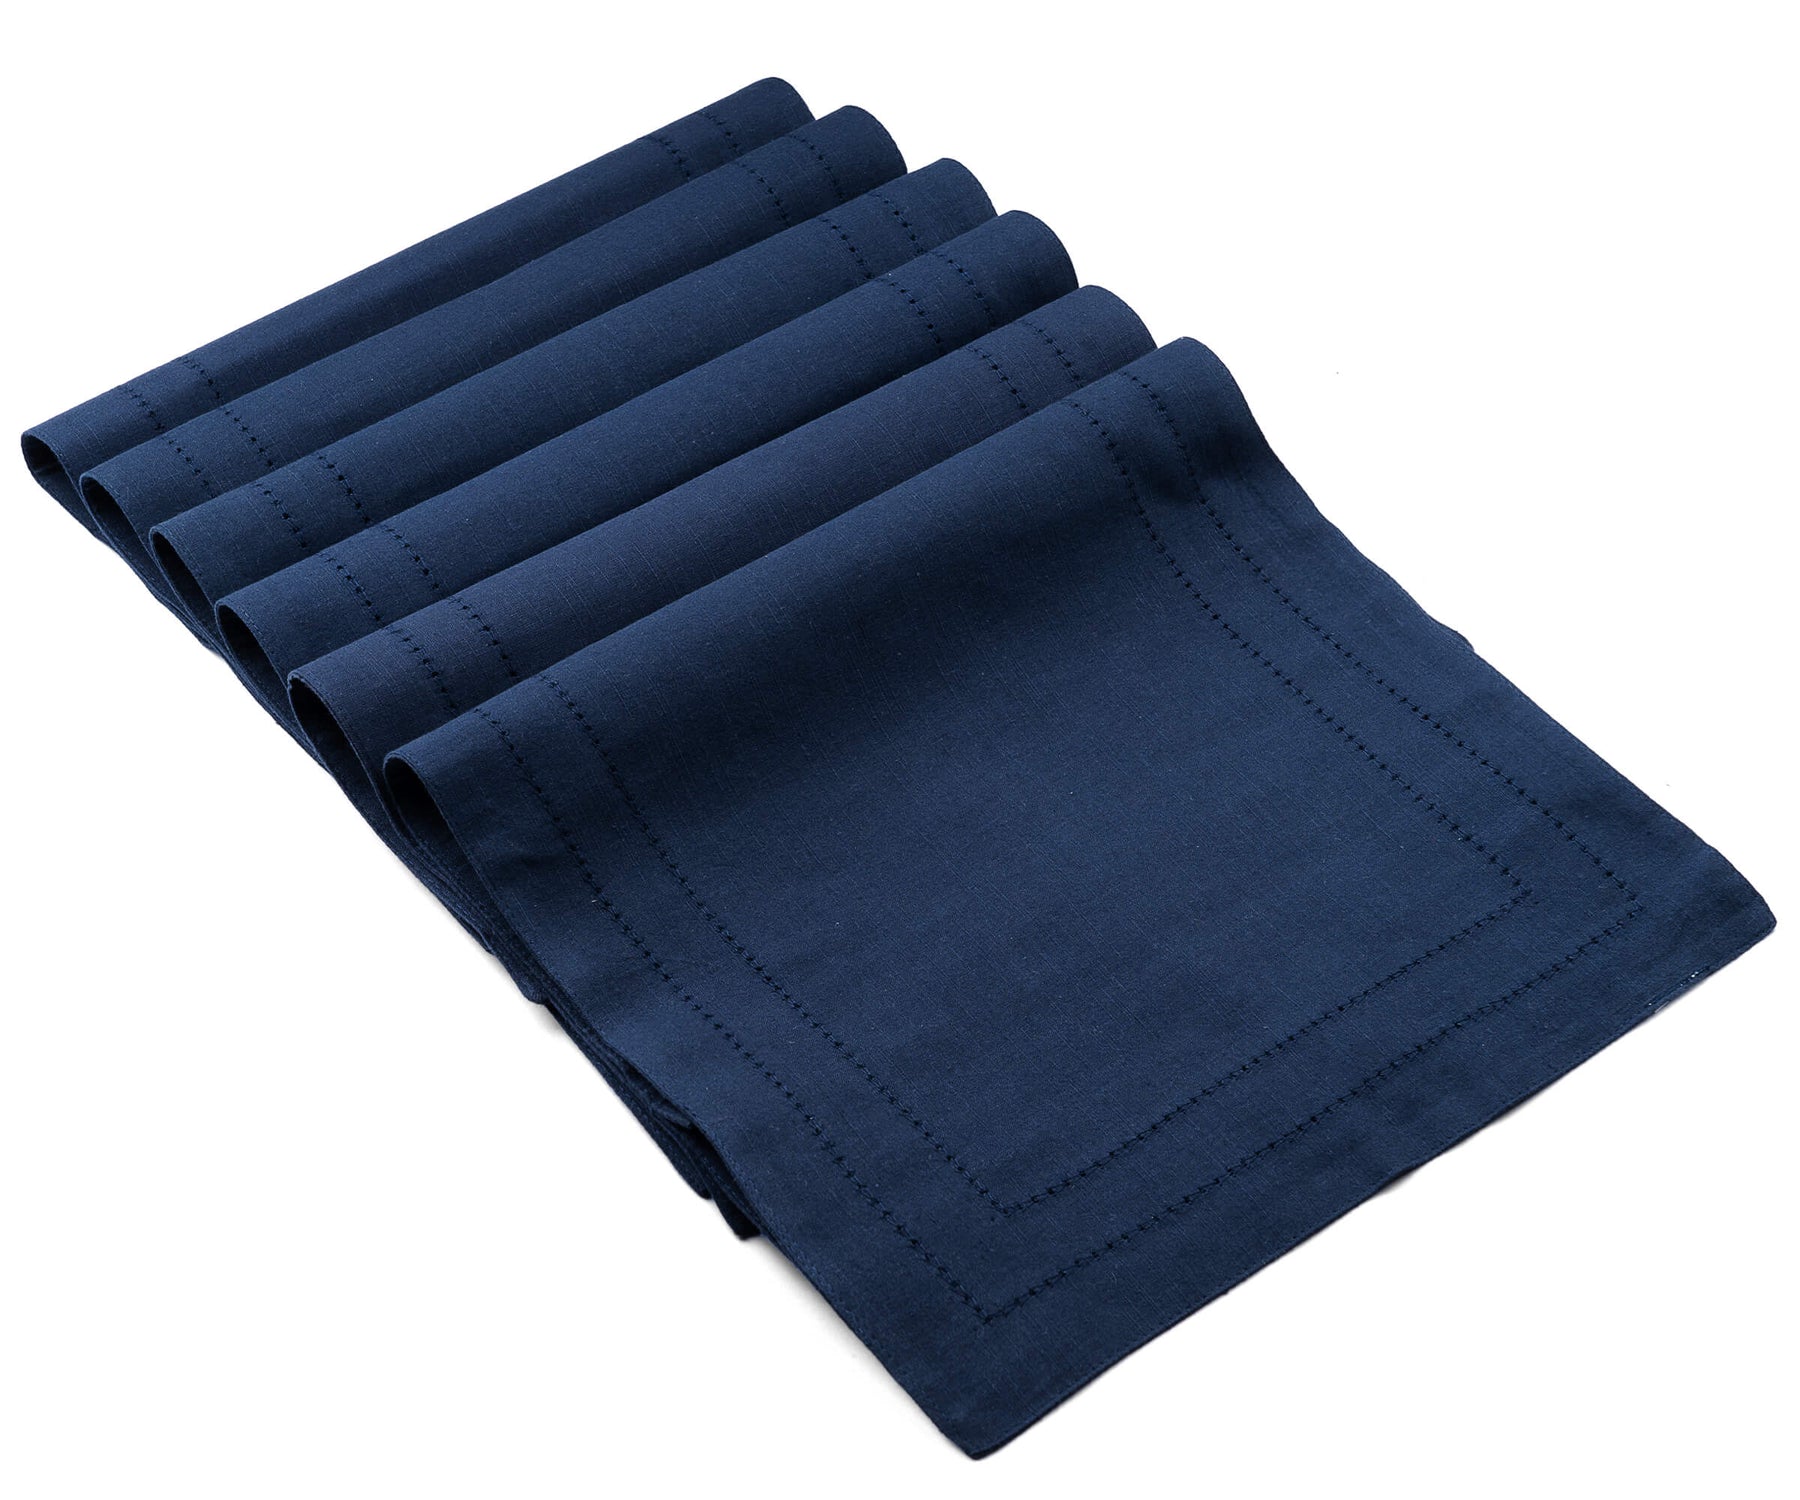 Folded rectangular placemats of size 13×18",a set of 6 hem stitched navy blue woven placemats are arranged one above another.